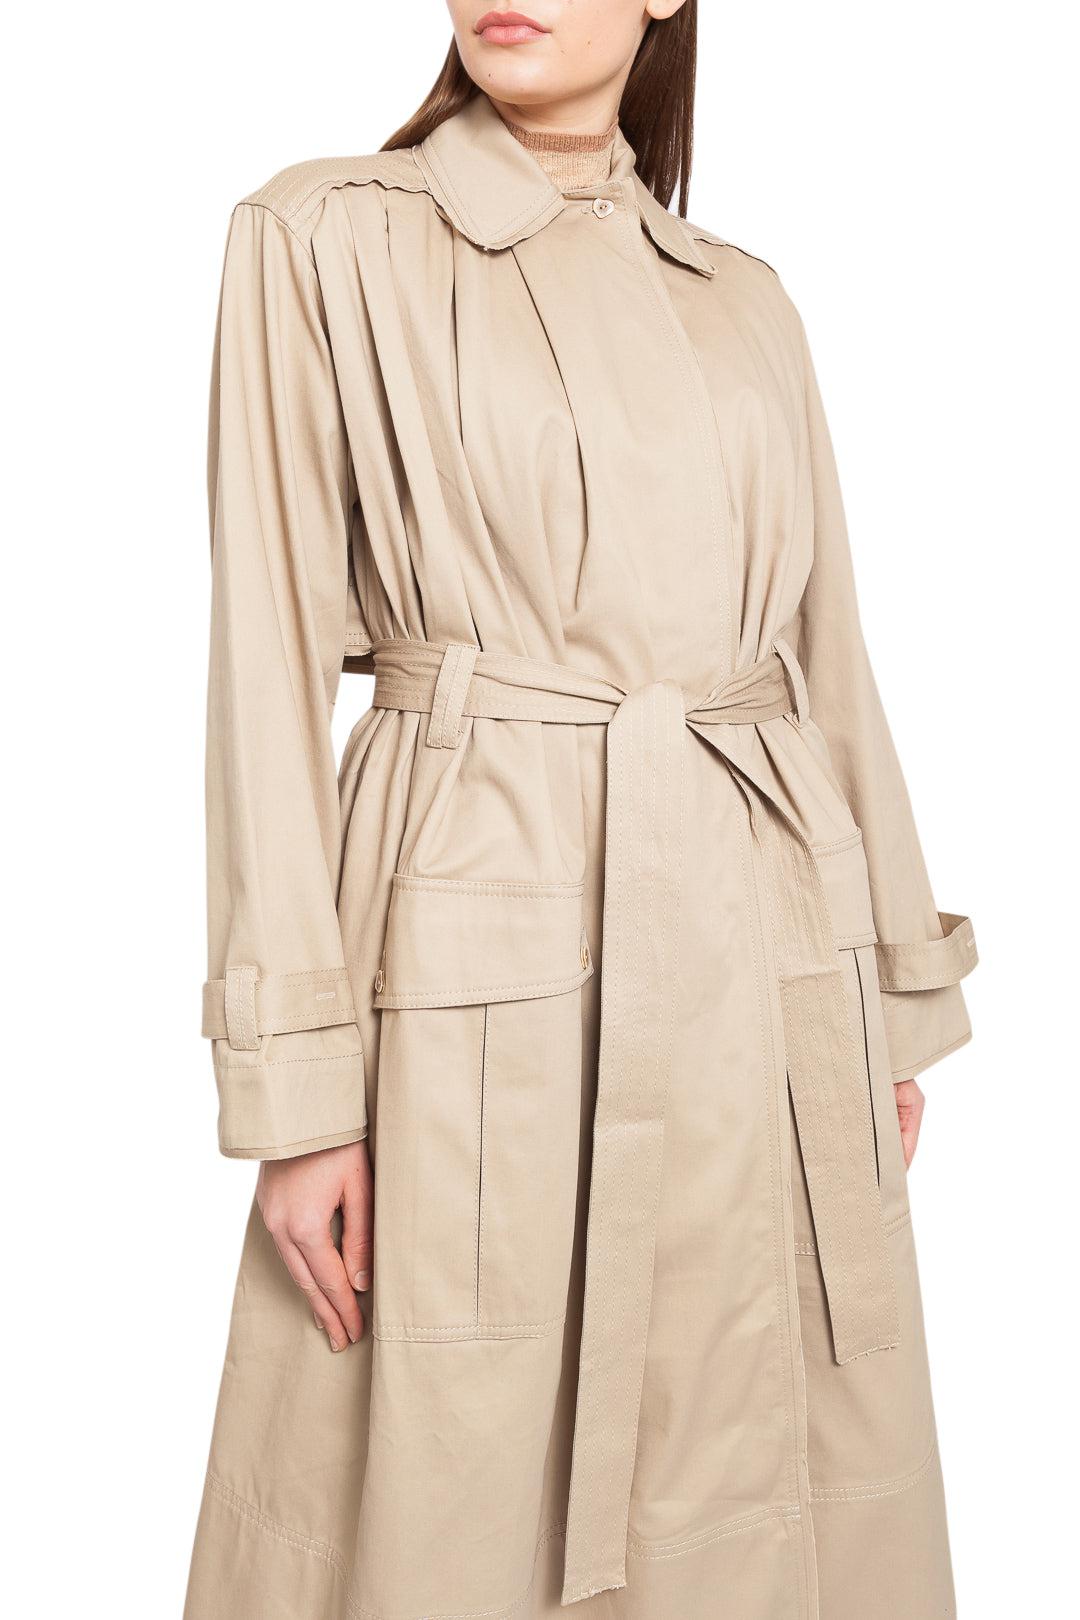 Aje-Flared long trench coat-21AW2014-dgallerystore